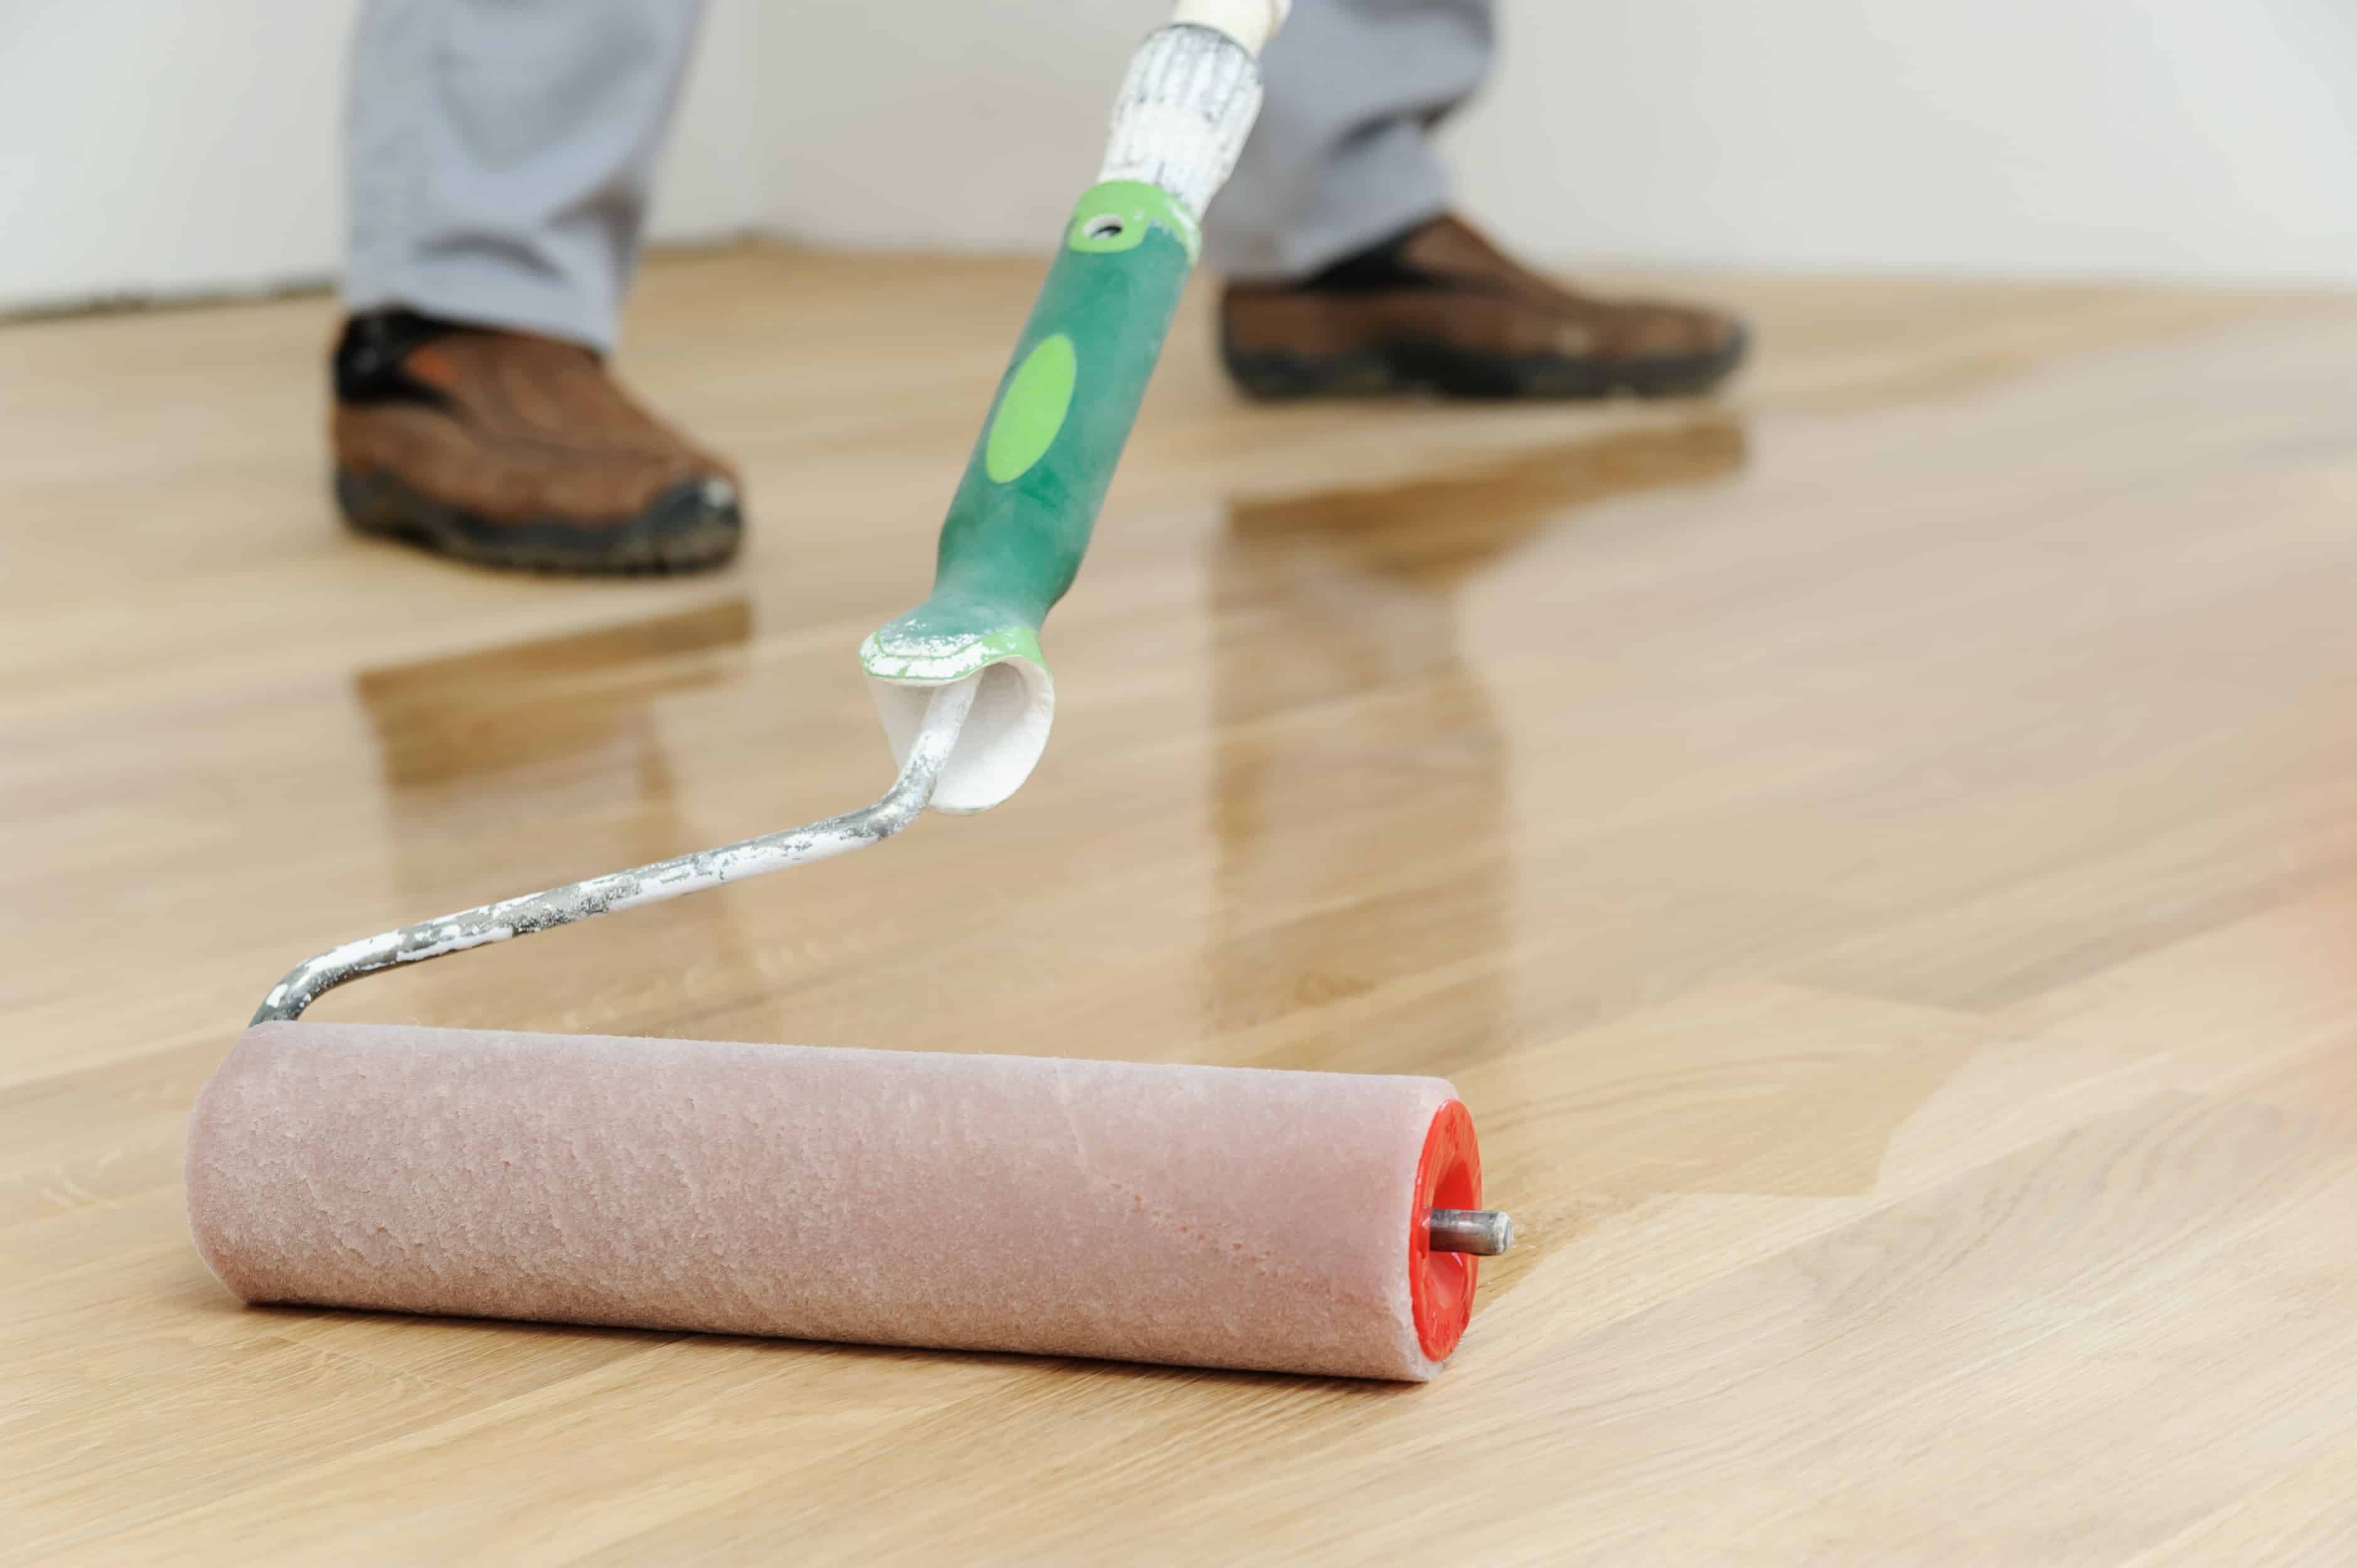 Lacquering wood floors. Use roller for coating floors.